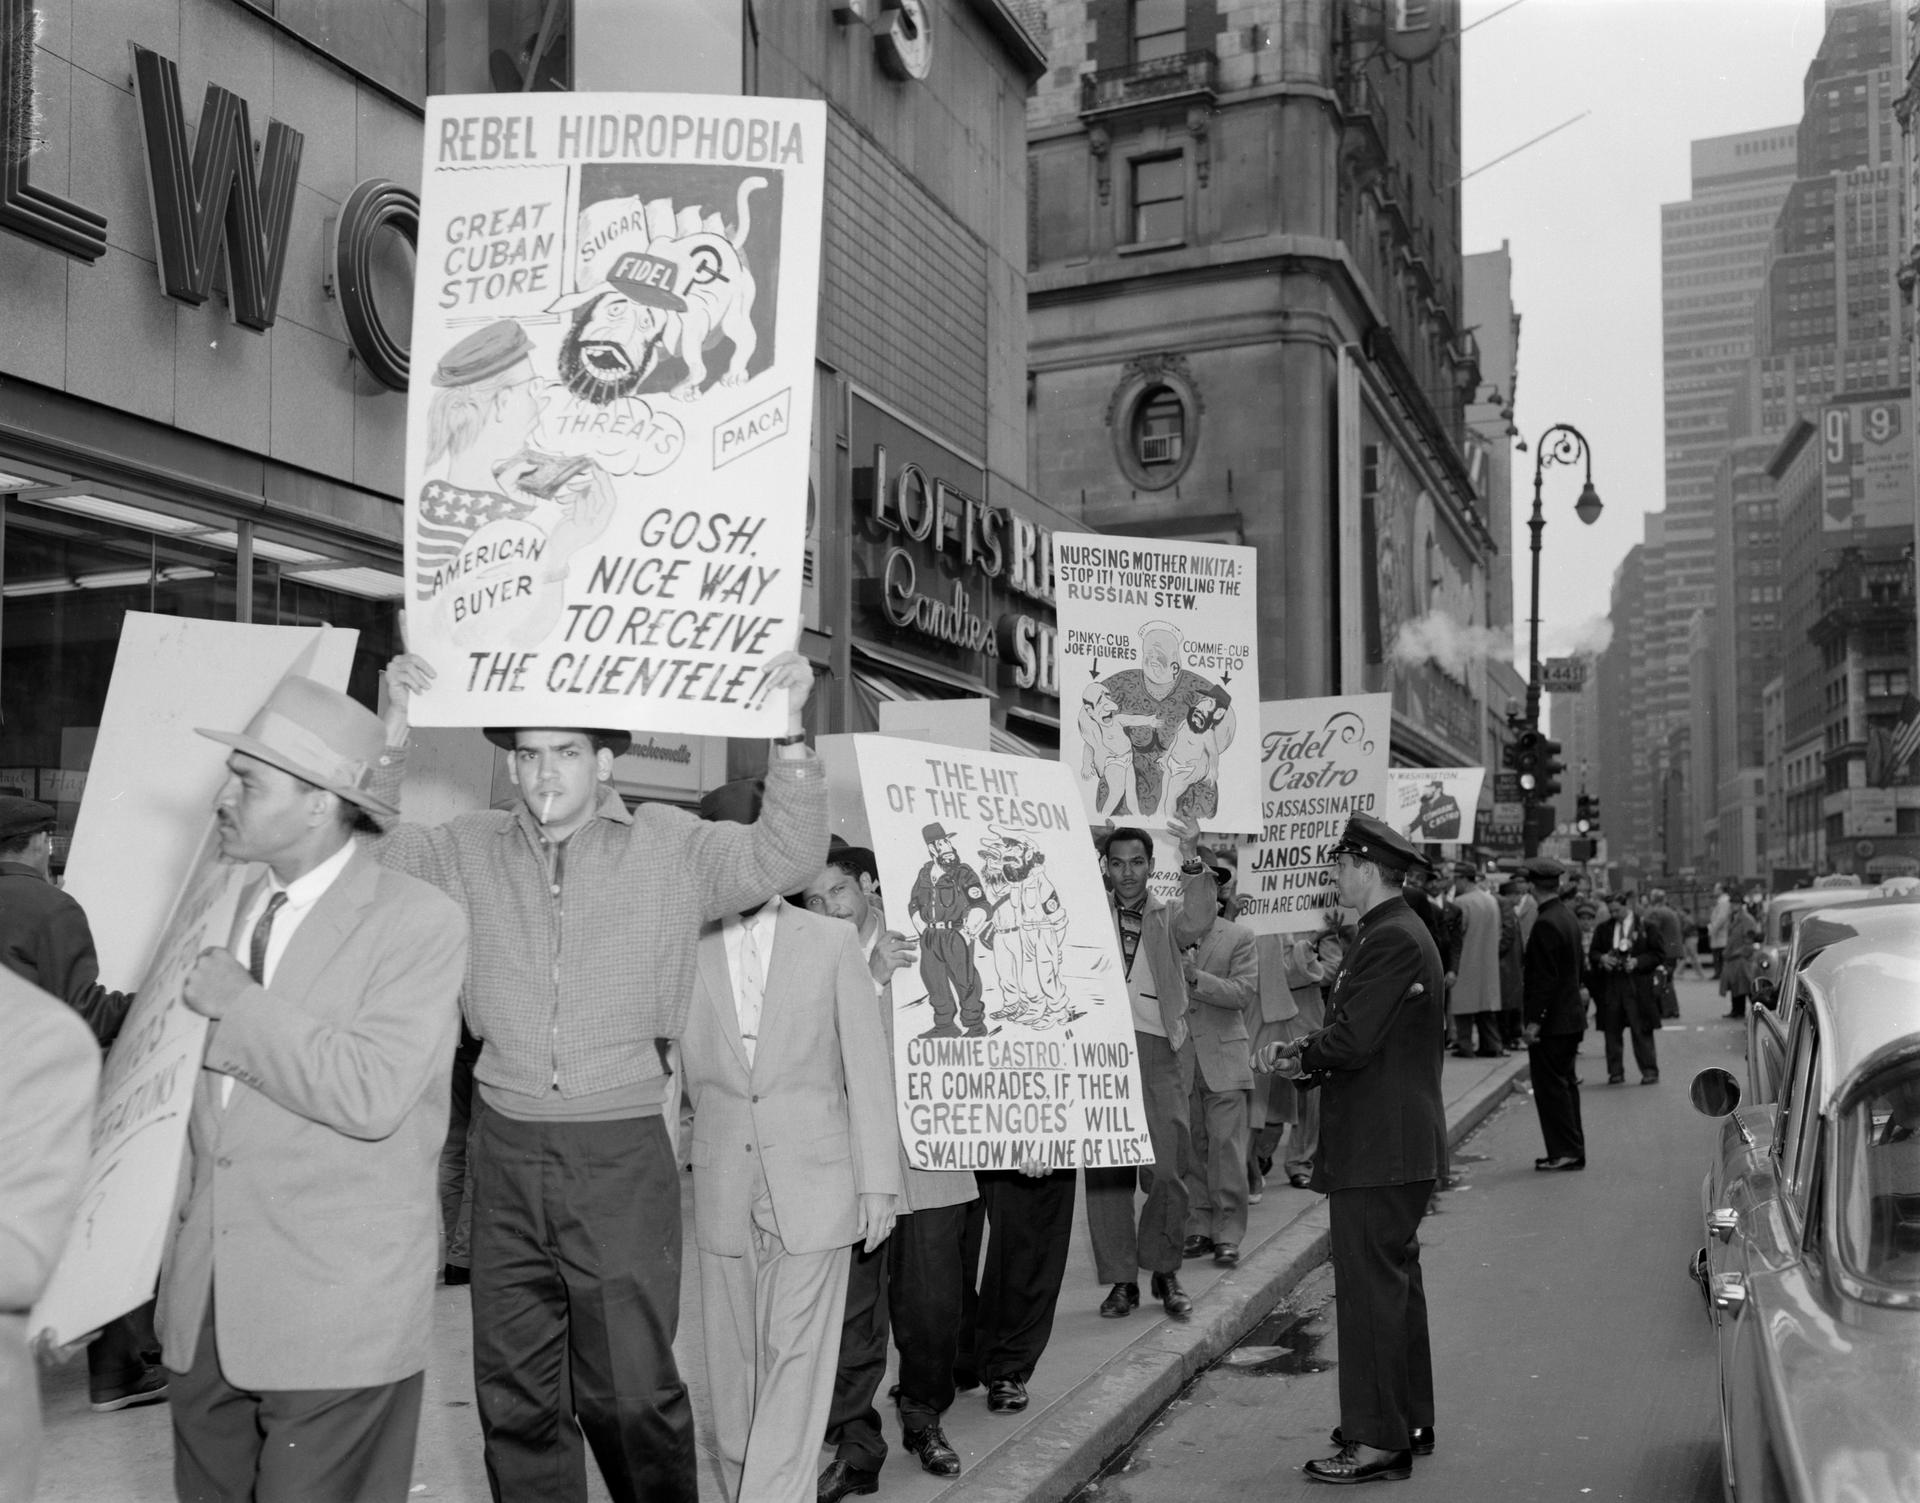 April 1959 - New York City, NY - These pickets were mounted opposite to the Hotel Astor in Times Square, where Cuban leader Fidel Castro was addressing the Overseas Press Club. Numerous police officers and federal agents kept watch over the protesters.